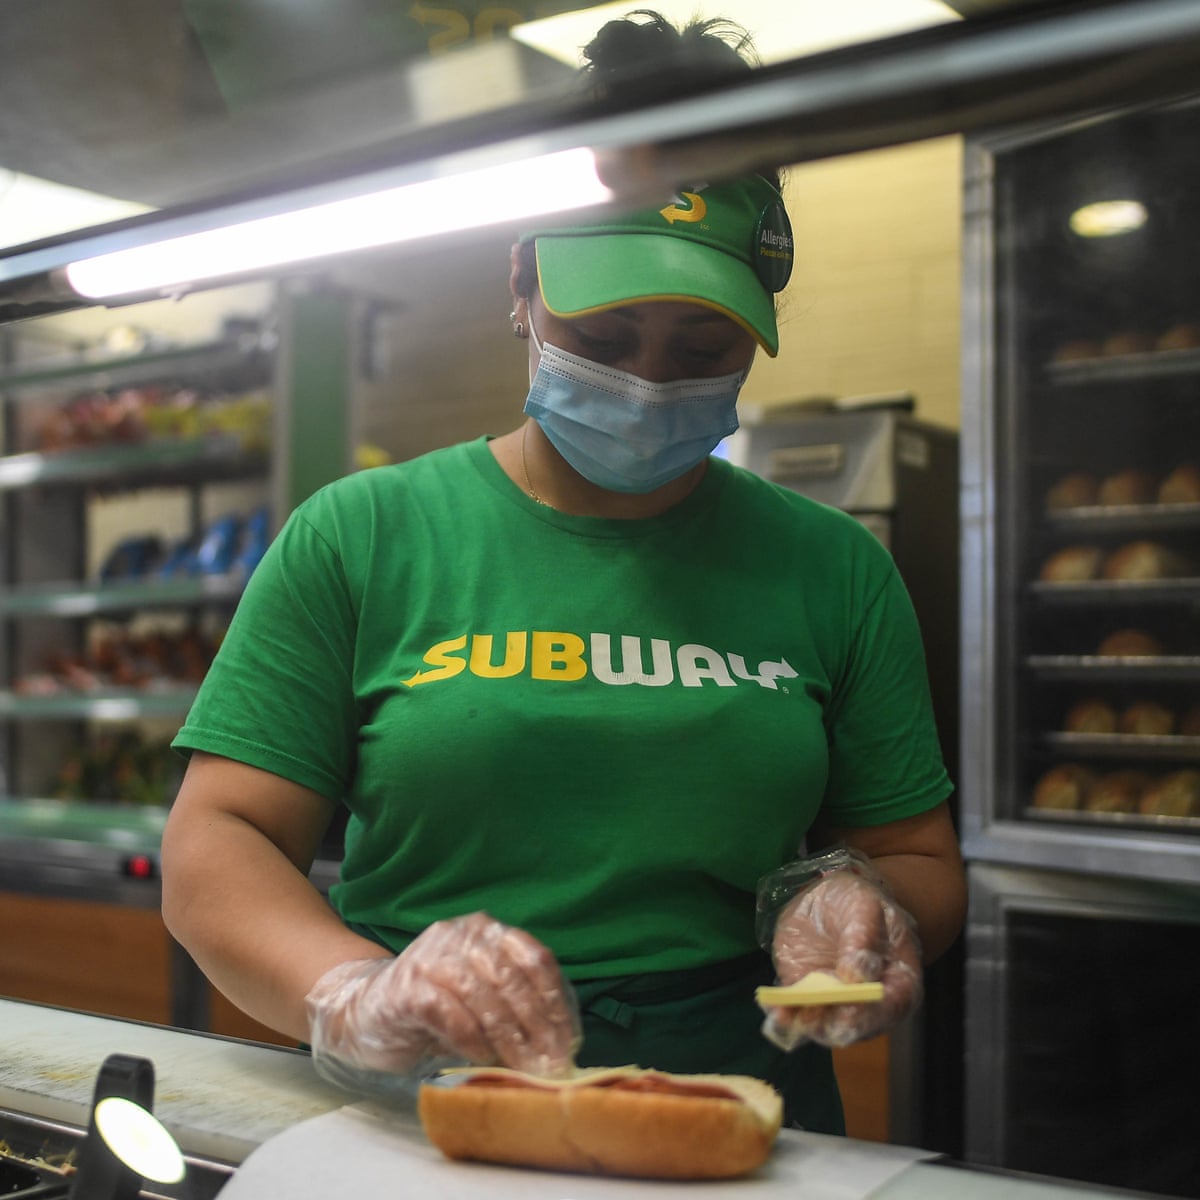 Does Subway Drug Test In 2022? (All You Need to Know)